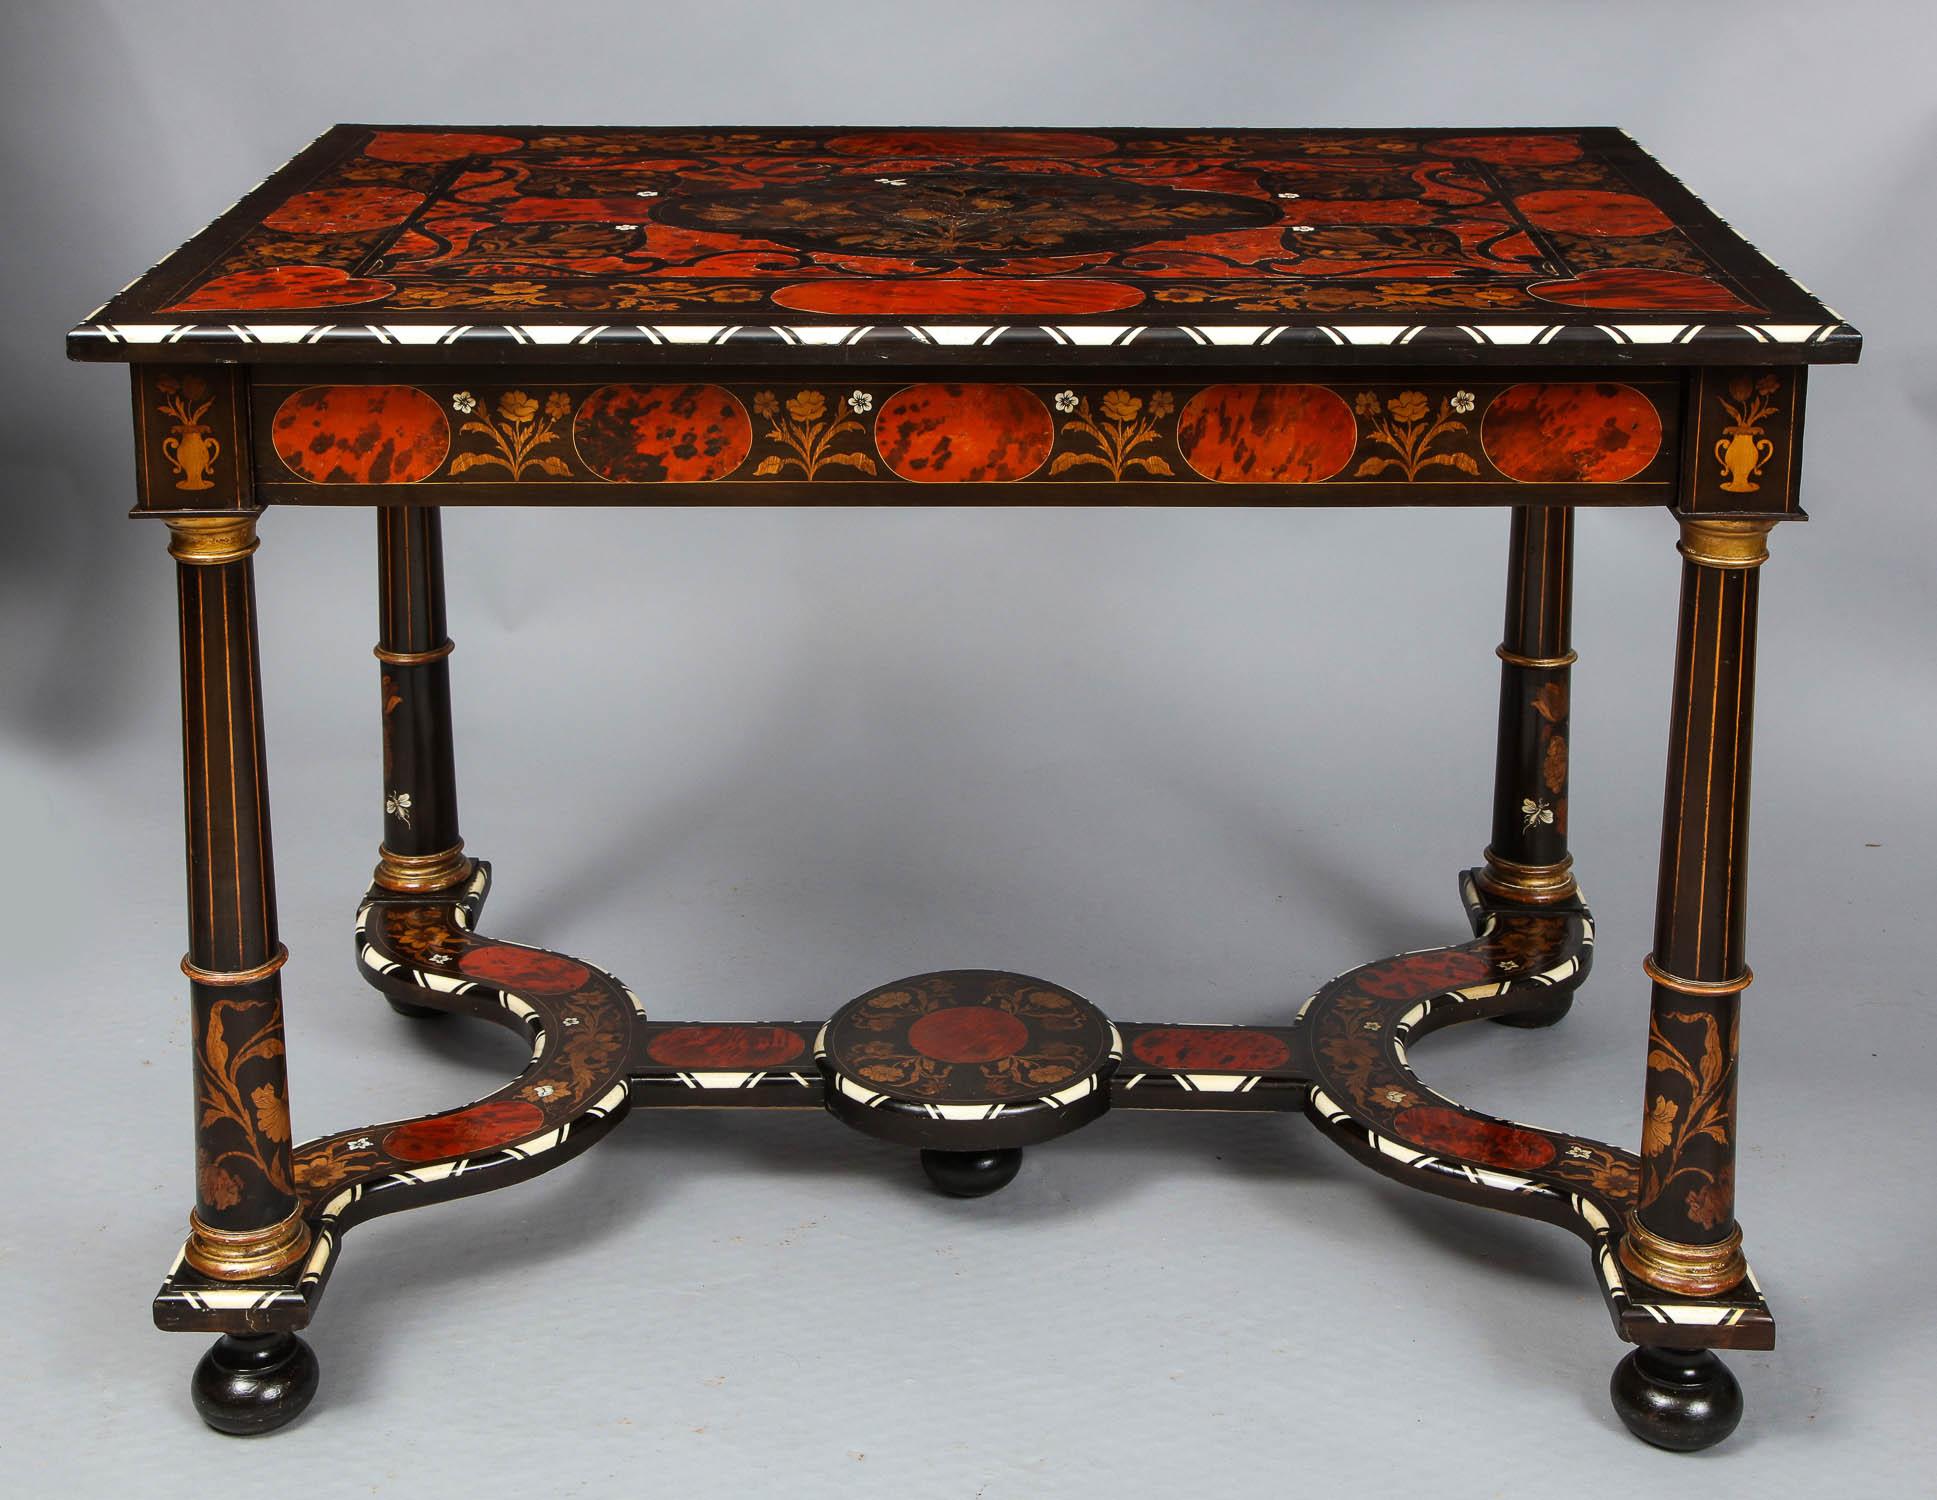 Very fine 19th century Flemish ebony center or writing table having floral marquetry inlay inlaid bone insects on a walnut, ebony and faux tortoise background, bone and ebony patterned moldings, with the legs with gilt capitals and bases, standing